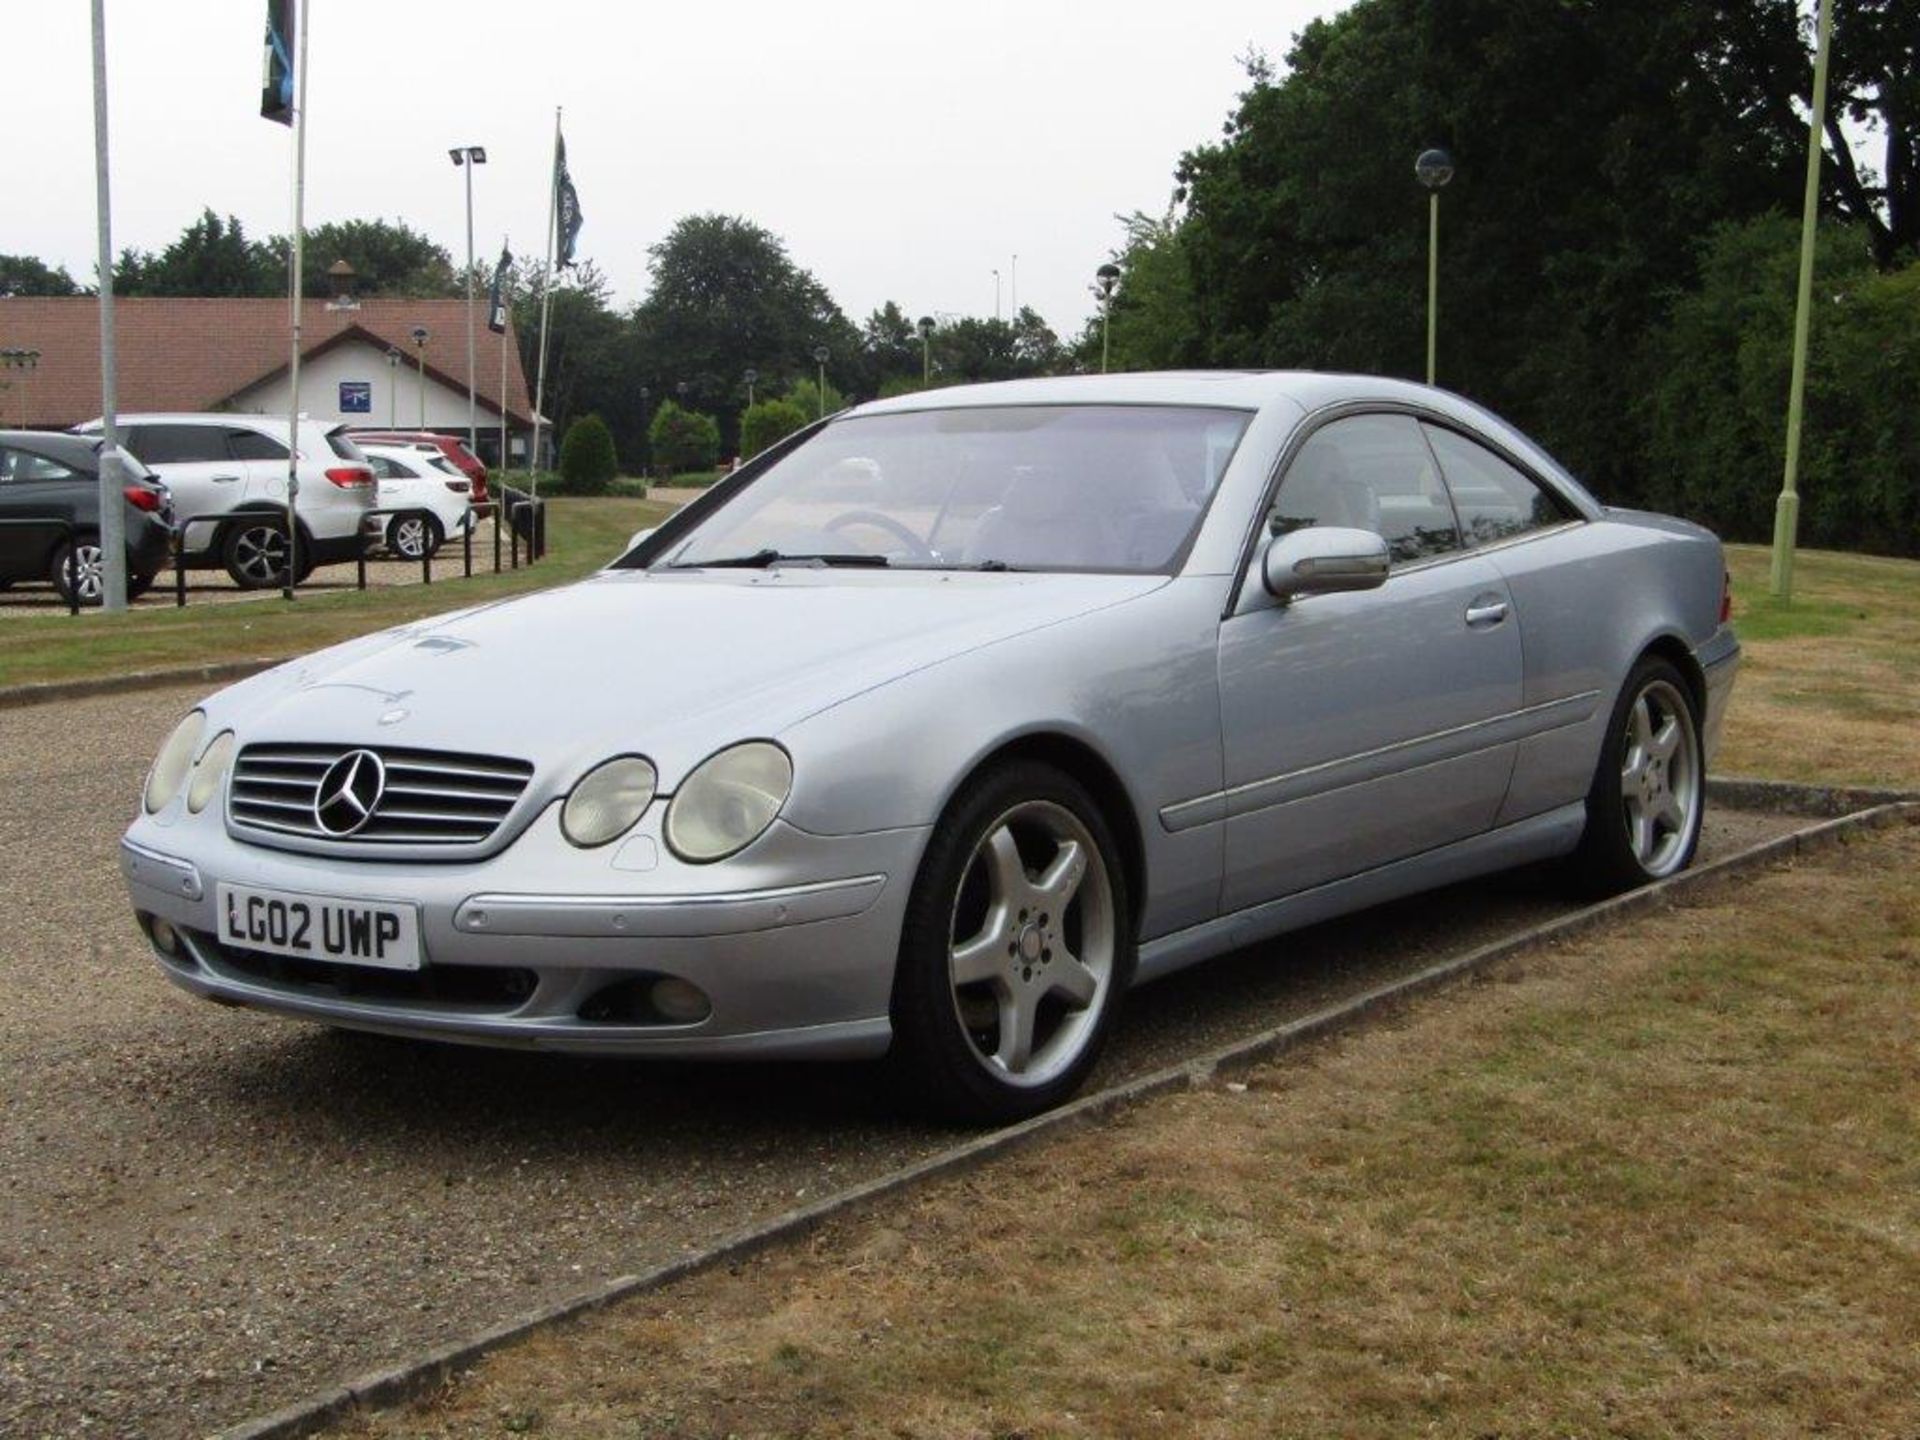 2002 Mercedes CL500 Coupe - Image 3 of 12